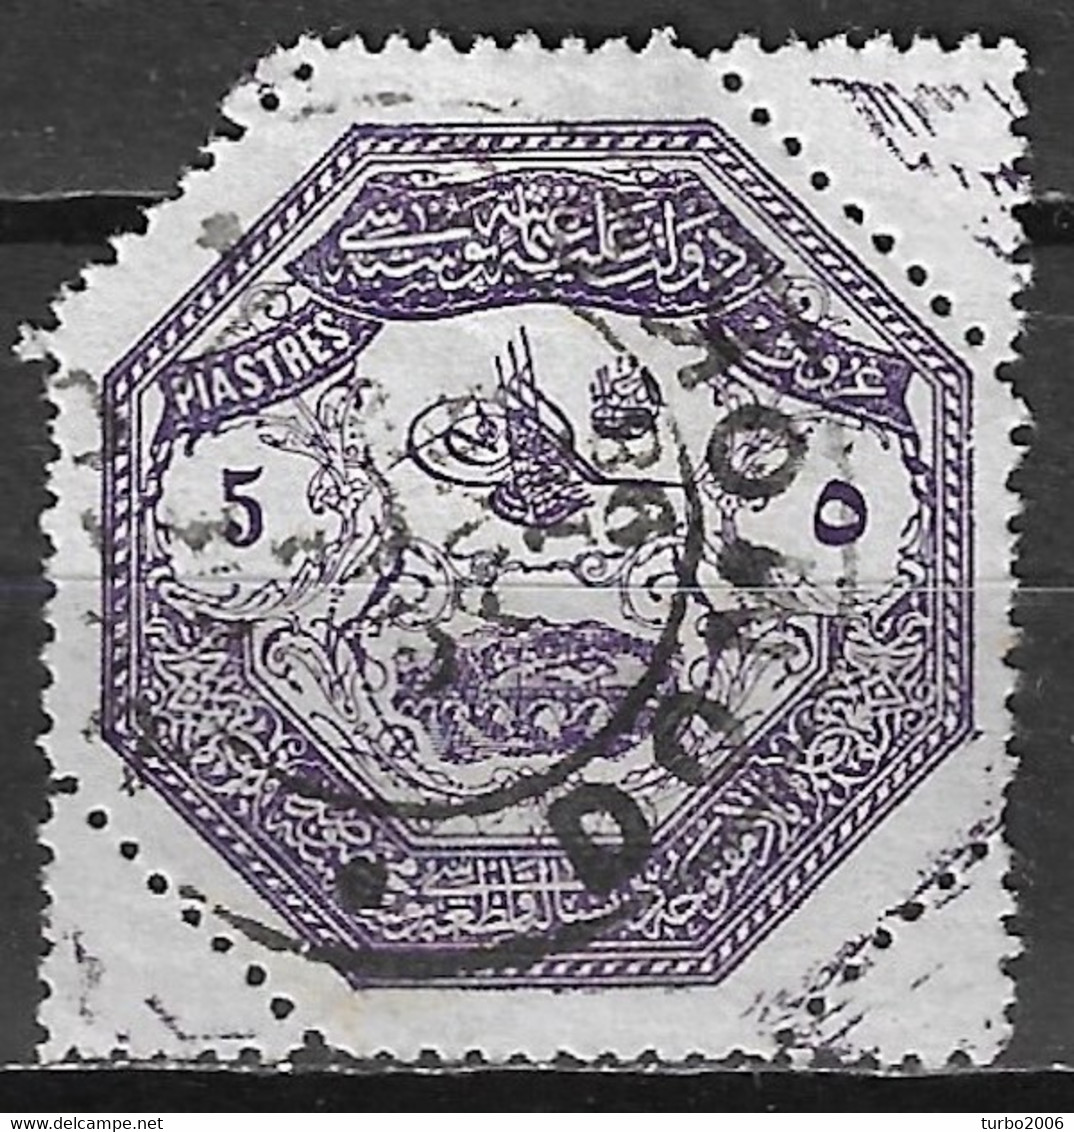 THESSALIA  1898 5 Pi Cancellation DOMOKOS By The Turkish Army Of Occupation During The Greek-Turkish War Of 1897 Vl. 5 - Thessaly